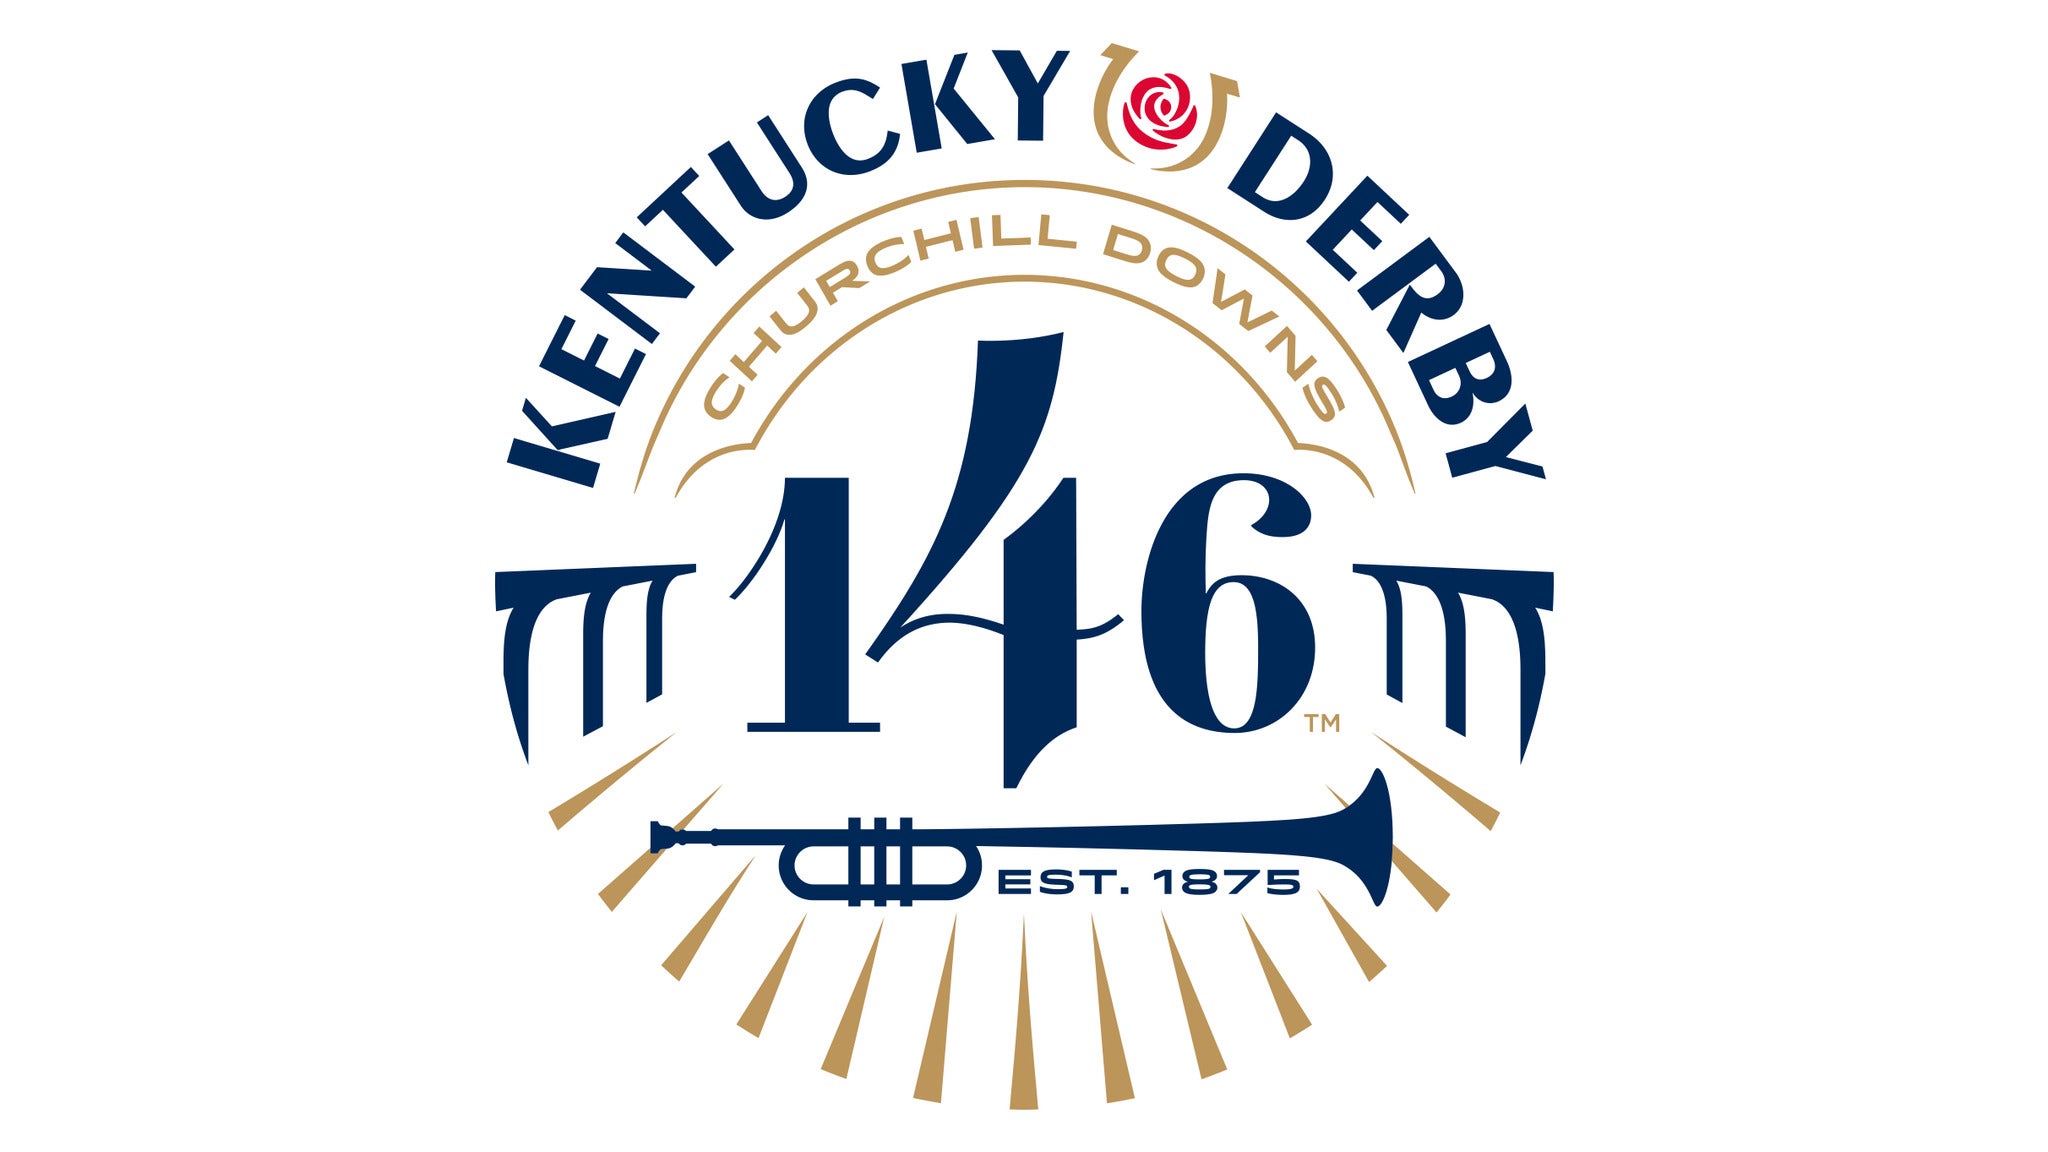 147th Kentucky Derby - Infield General Admission *No Front Side Access in Louisville promo photo for Advance Purchase Pricing presale offer code